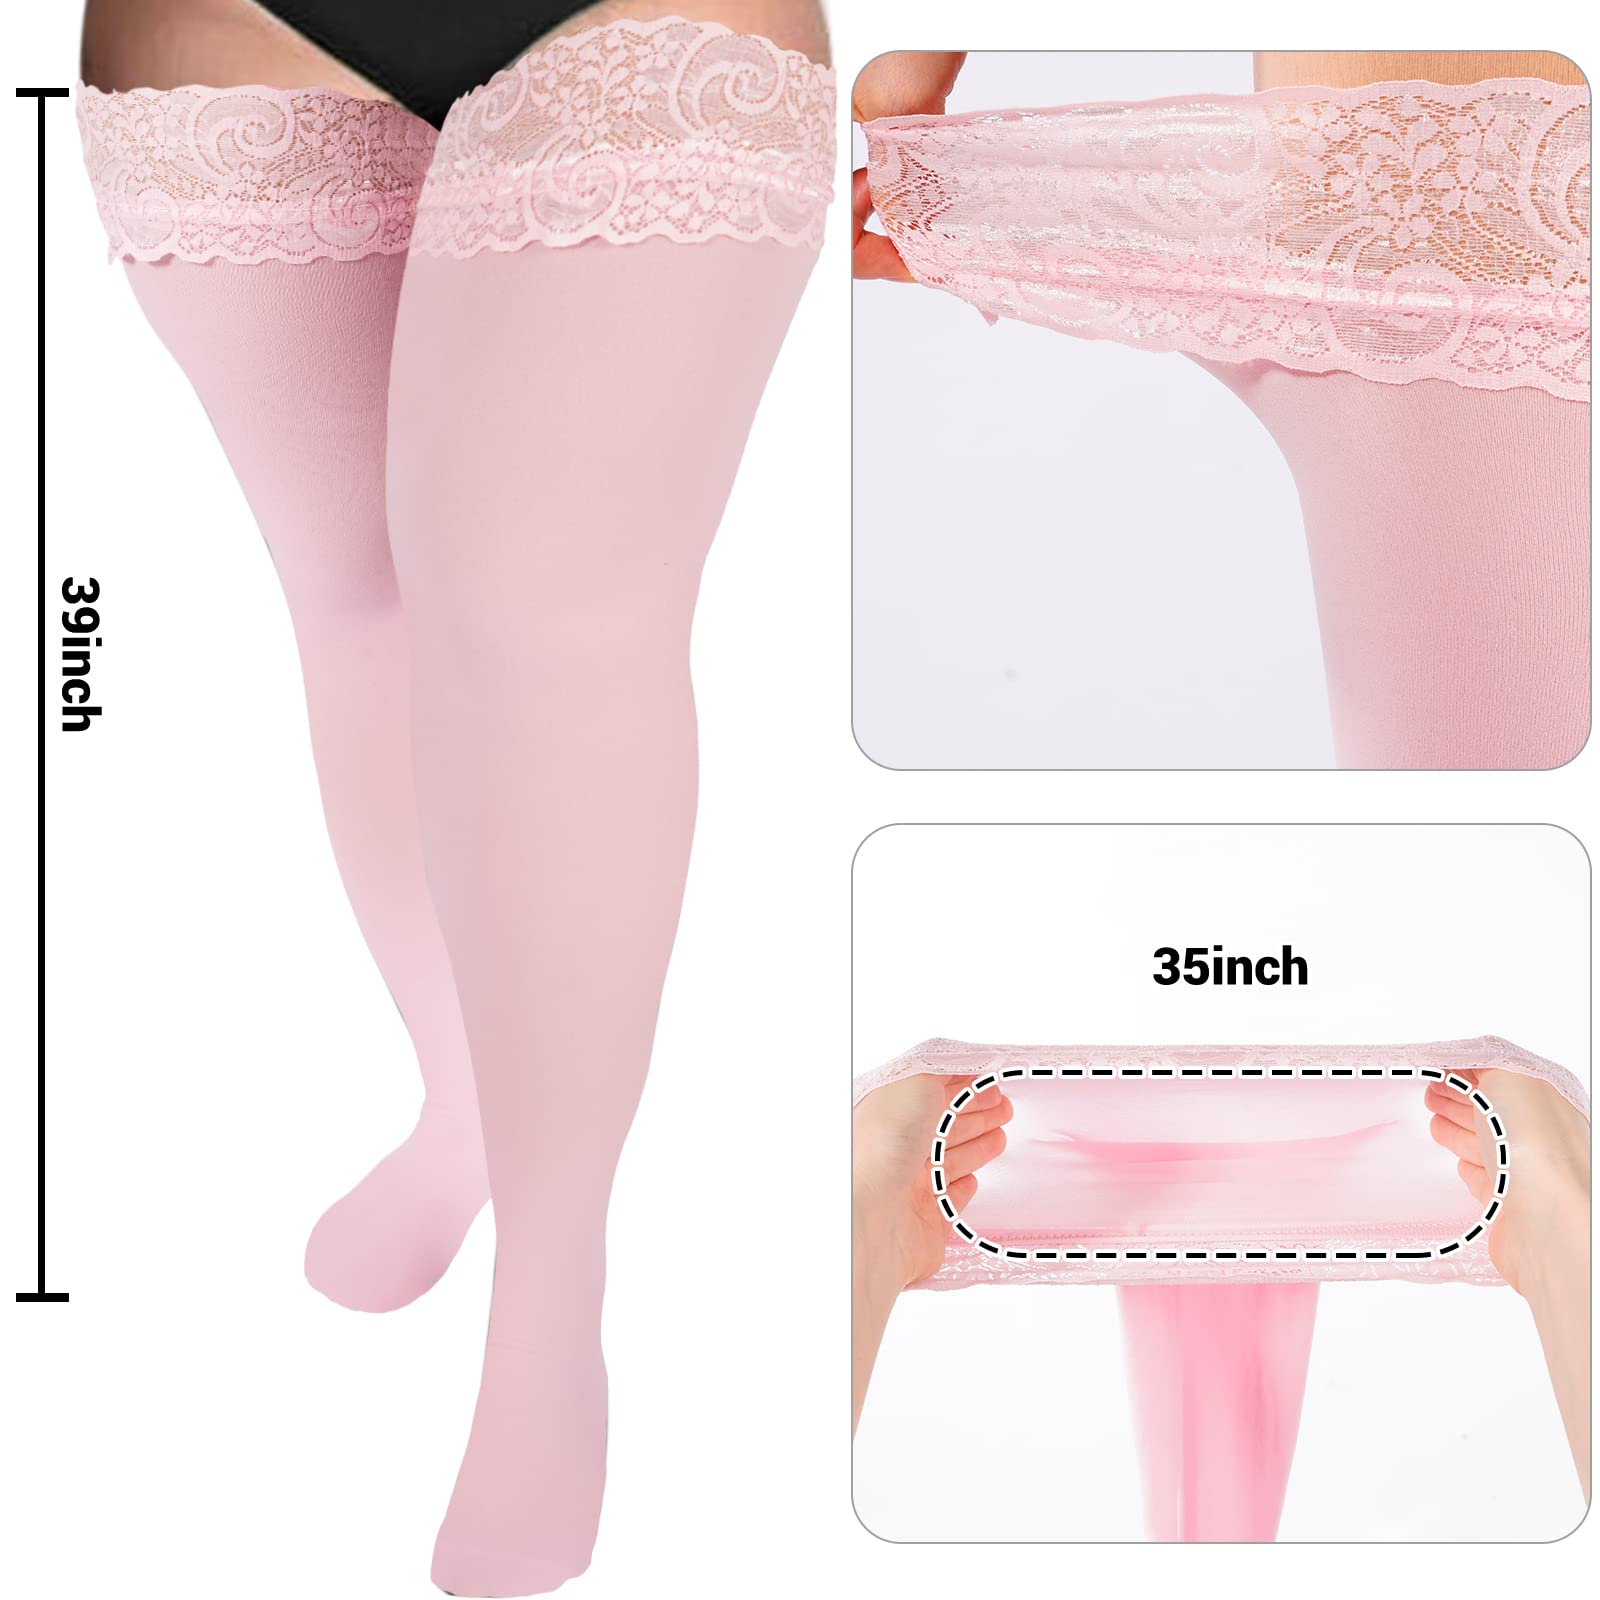 55D Semi Sheer Silicone Lace Stay Up Thigh Highs Pantyhose-Light Pink